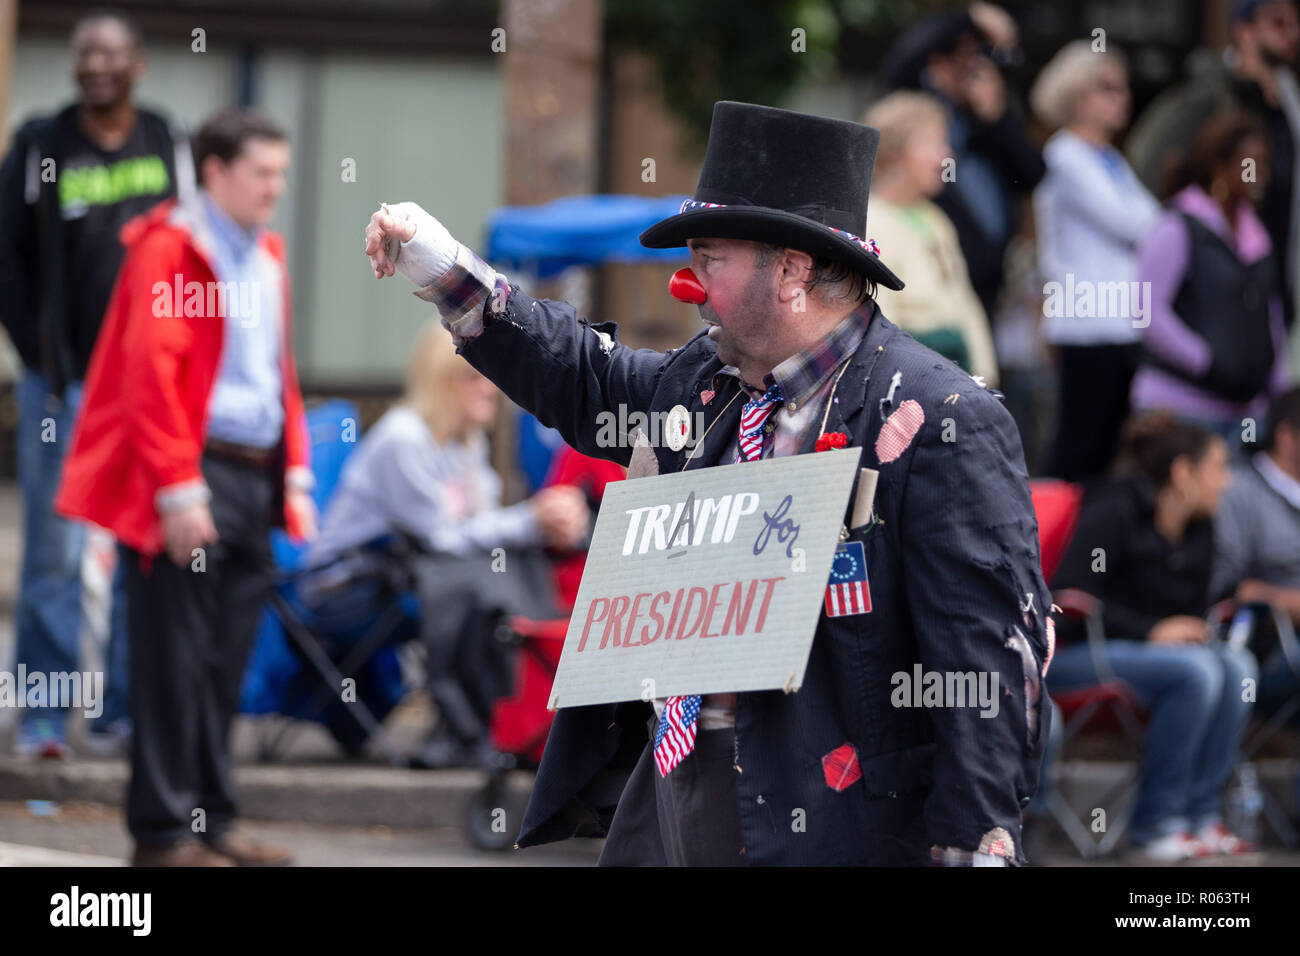 Portland, OR / USA - June 11 2016: Grand floral parade, old male person in a costume of clown bozo with 'trump for president' sign. Stock Photo